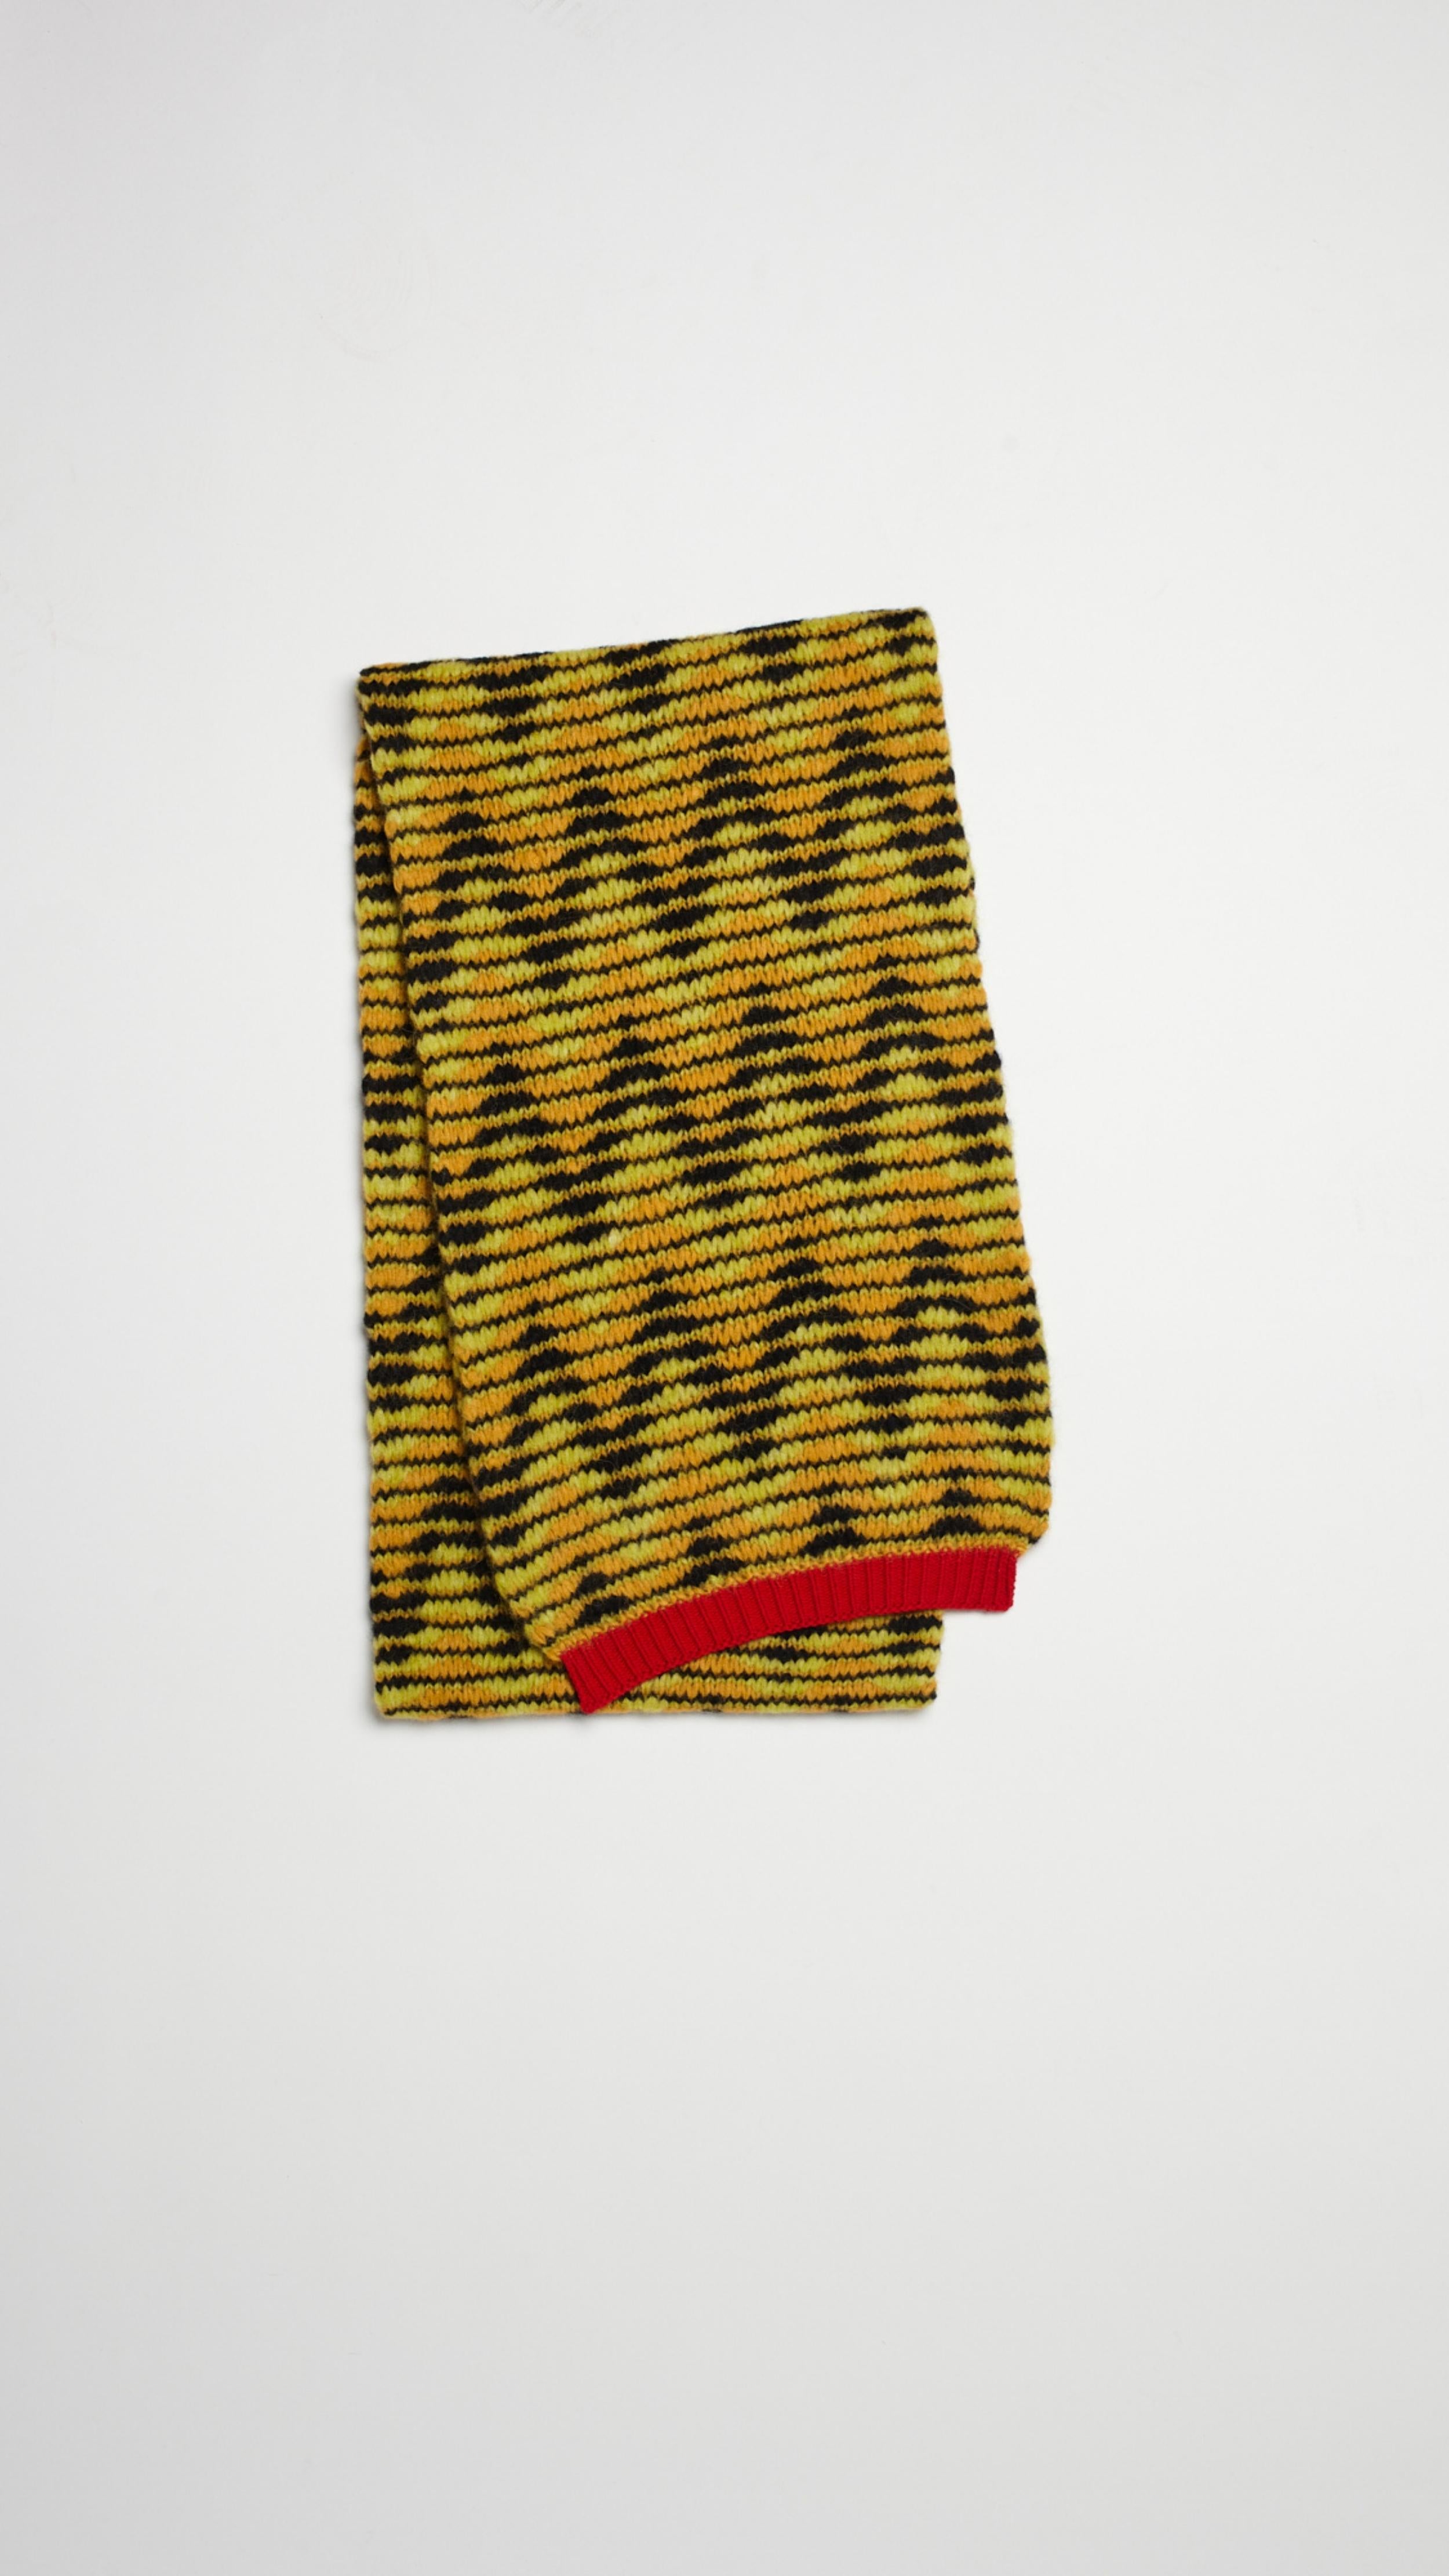 Plan C Jacquard Knit Oversize Scarf in pistachio, black and ochre colored chevron V pattern. Pop of red at the trim. Super oversized made from soft alpaca and wool blend. Photo shown folded. 